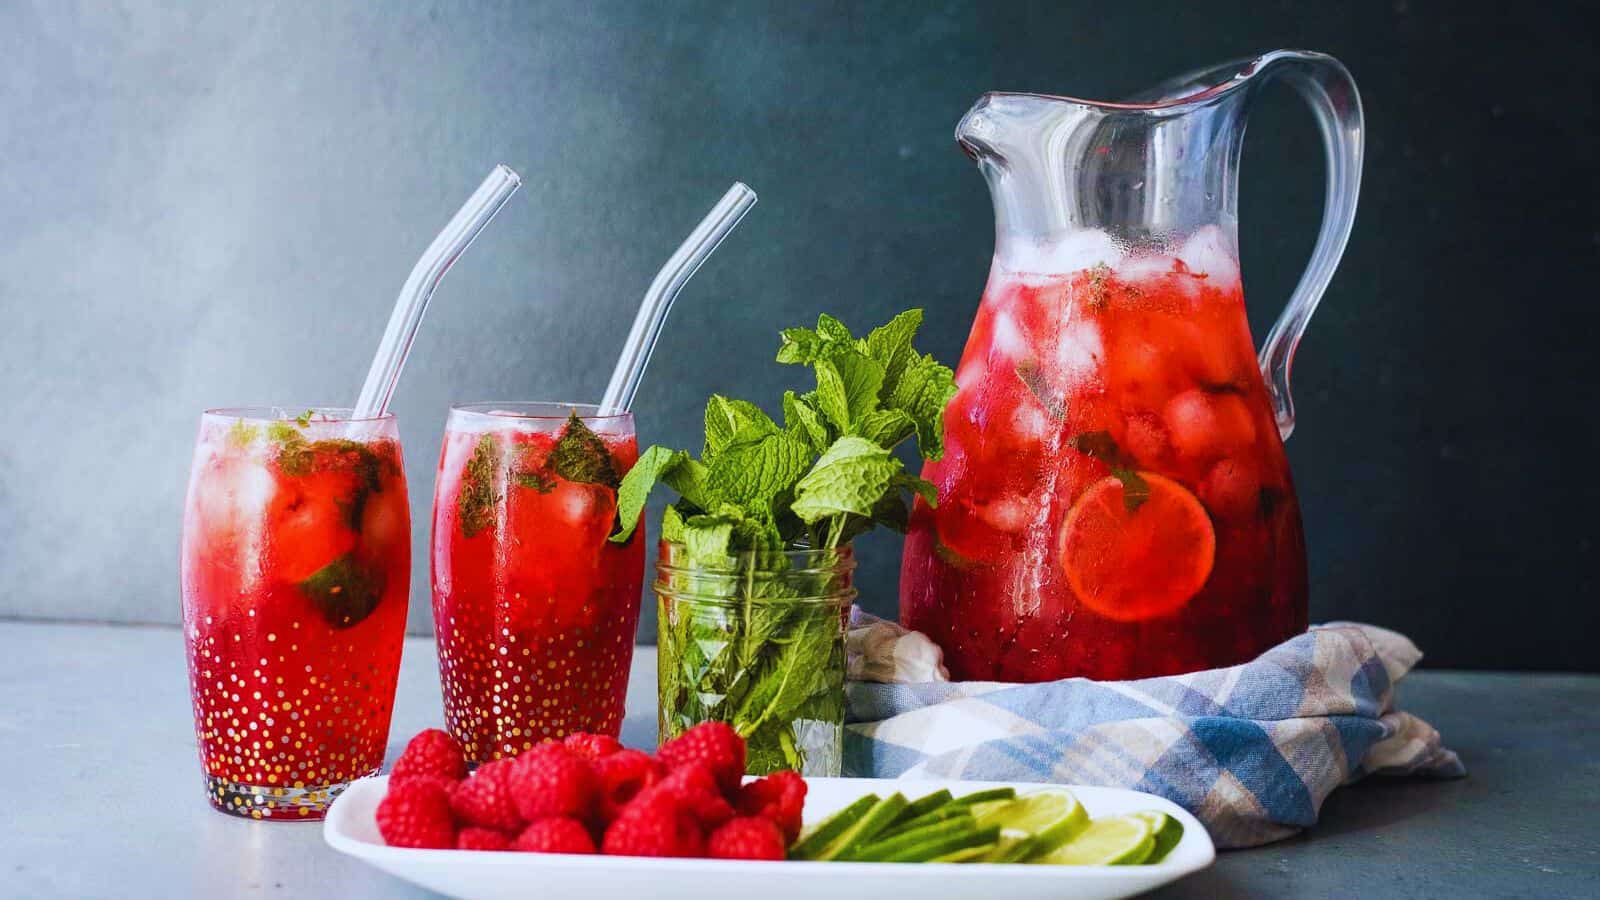 <p>Savor the freshness of a Raspberry Mojito Cocktail. Made with mint, rum, and fresh raspberries, it’s a modern take on a classic drink. Perfect for warm evenings when you want something light and flavorful. Takes about 5 minutes to prepare, allowing you to enjoy its vibrant taste without waiting long.<br><strong>Get the Recipe: </strong><a href="https://reneenicoleskitchen.com/raspberry-mojito-cocktail/?utm_source=msn&utm_medium=page&utm_campaign=10%20classic%20cocktails%20&%20mocktails%20you%20should%20know%20how%20to%20make">Raspberry Mojito Cocktail</a></p>